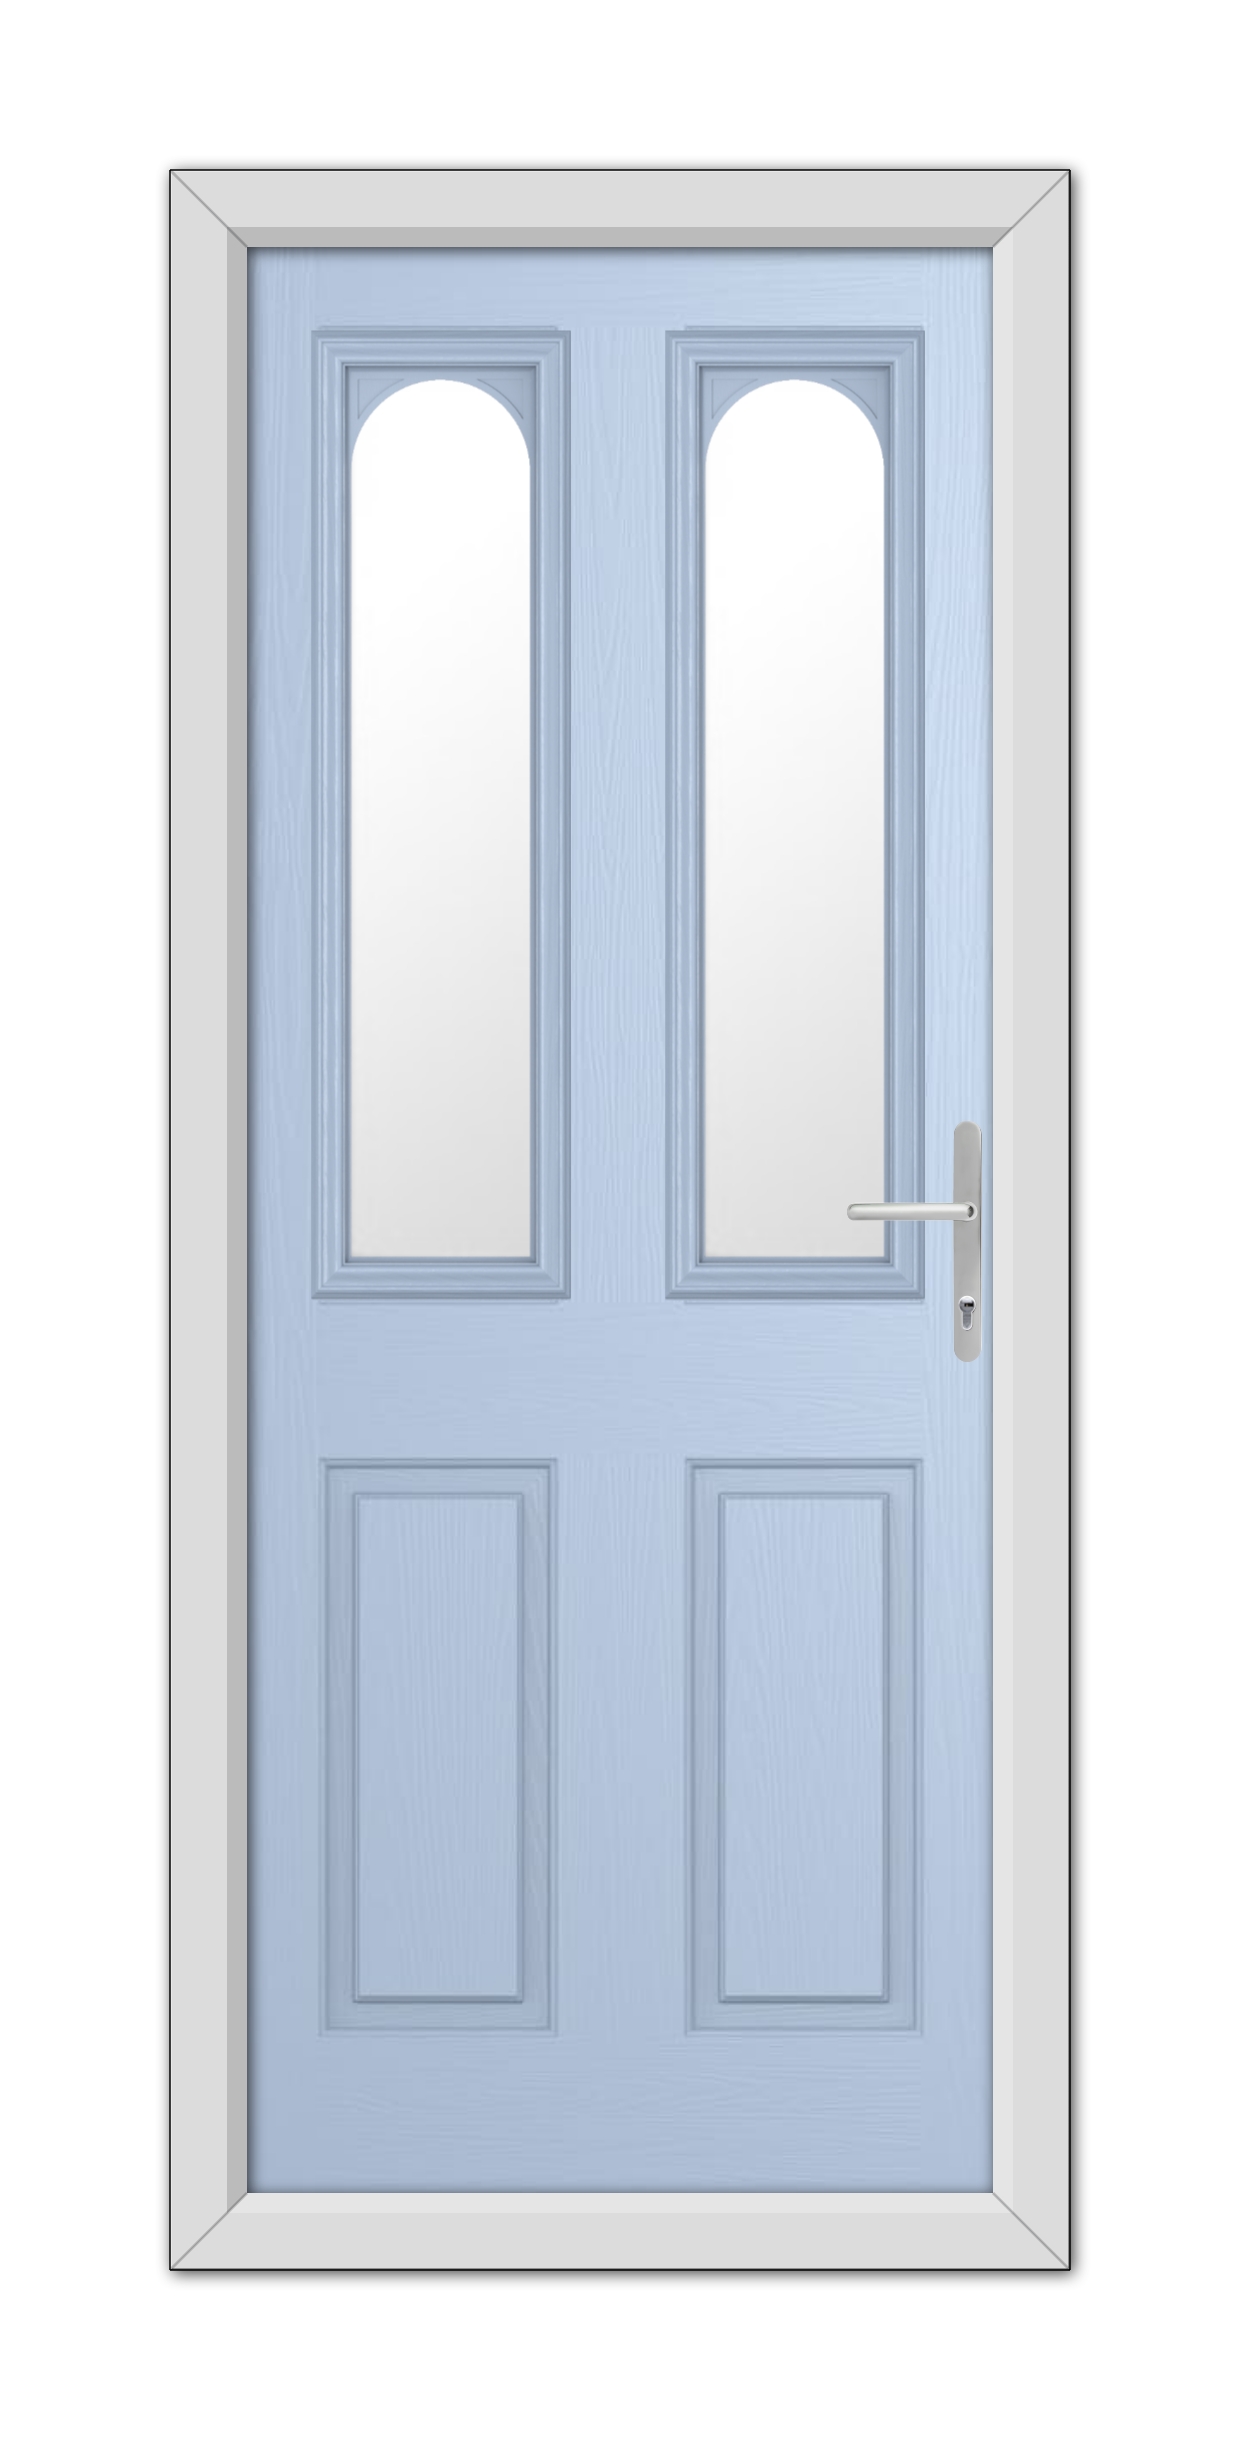 Duck Egg Blue Elmhurst Composite Door with oval glass windows and a silver handle, set in a white frame.